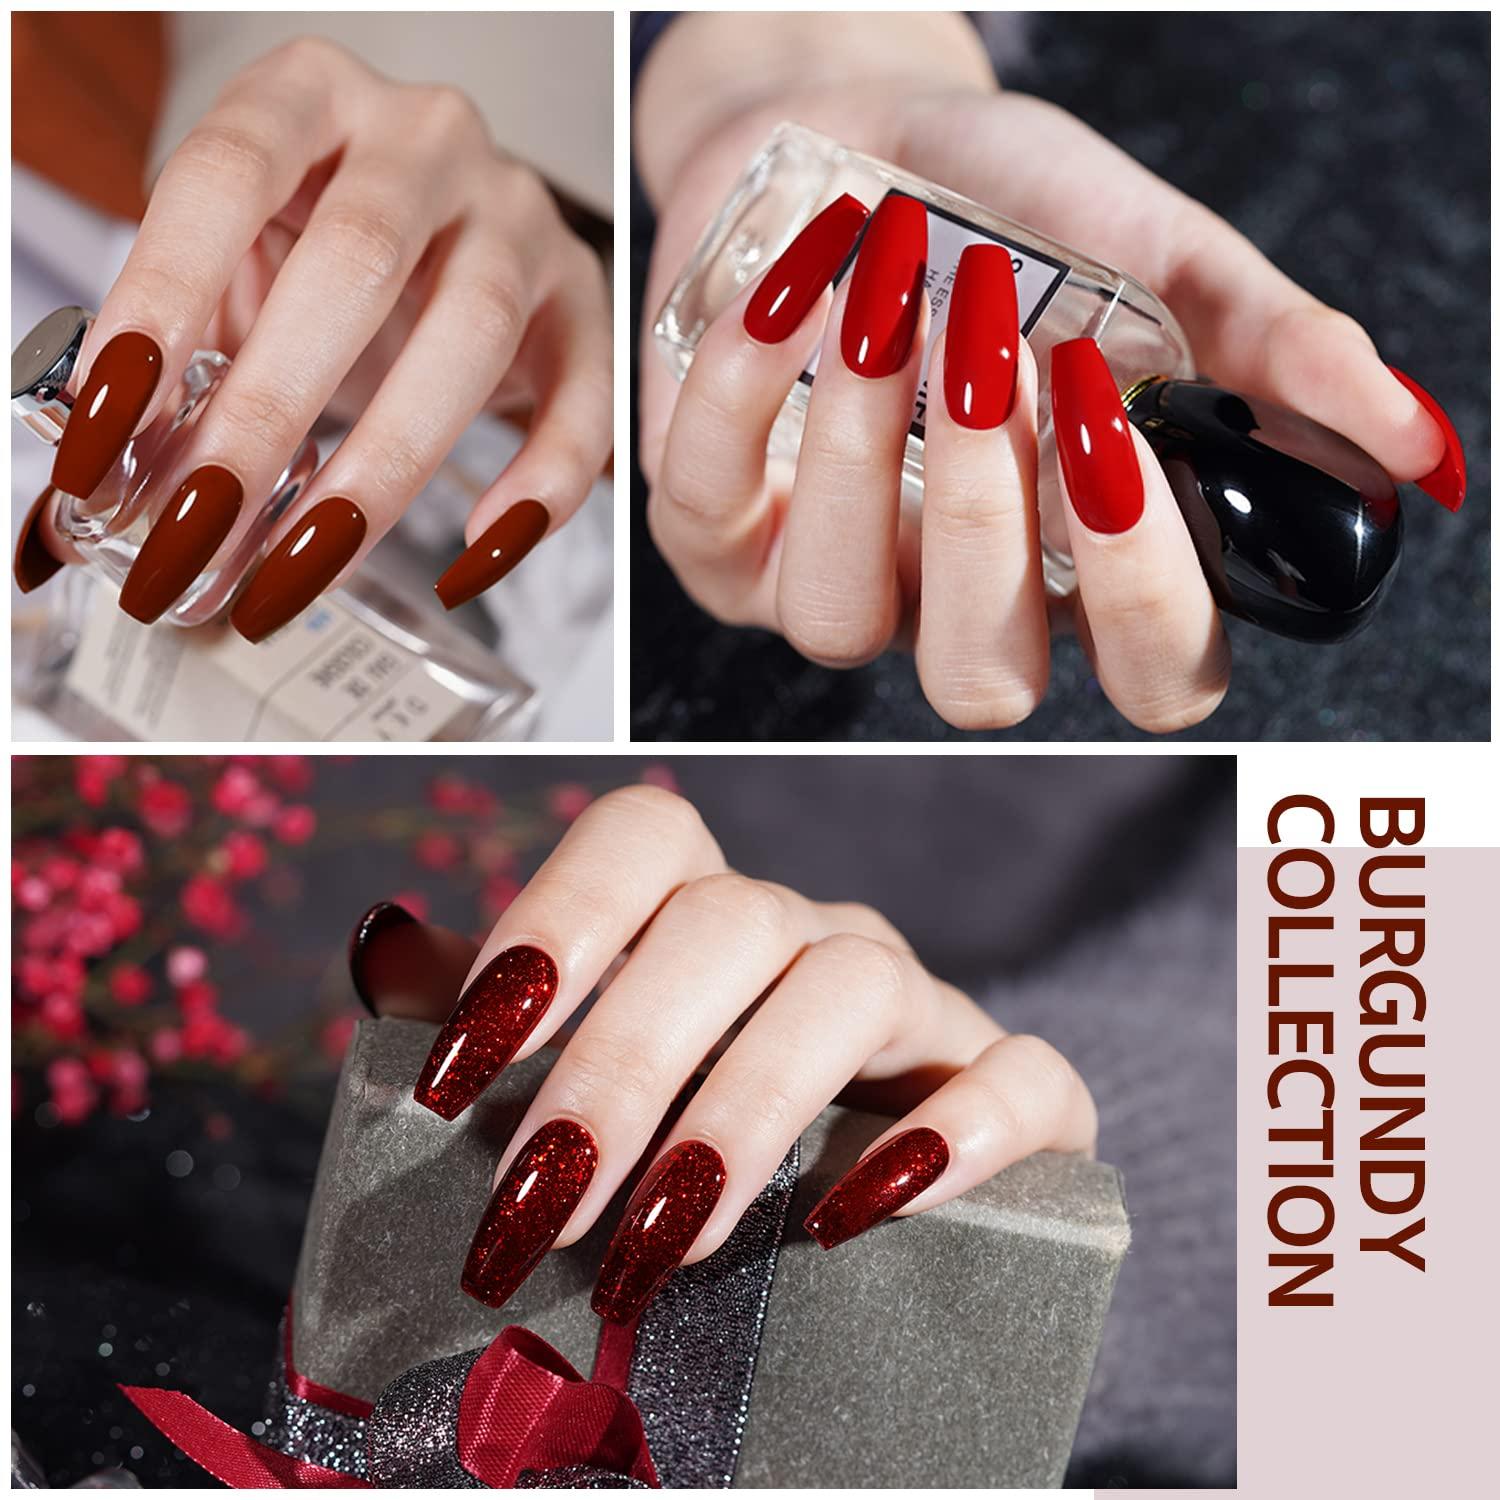 RELIABLE Rustic Red Nail Polish | Dr.'s REMEDY Nail Care